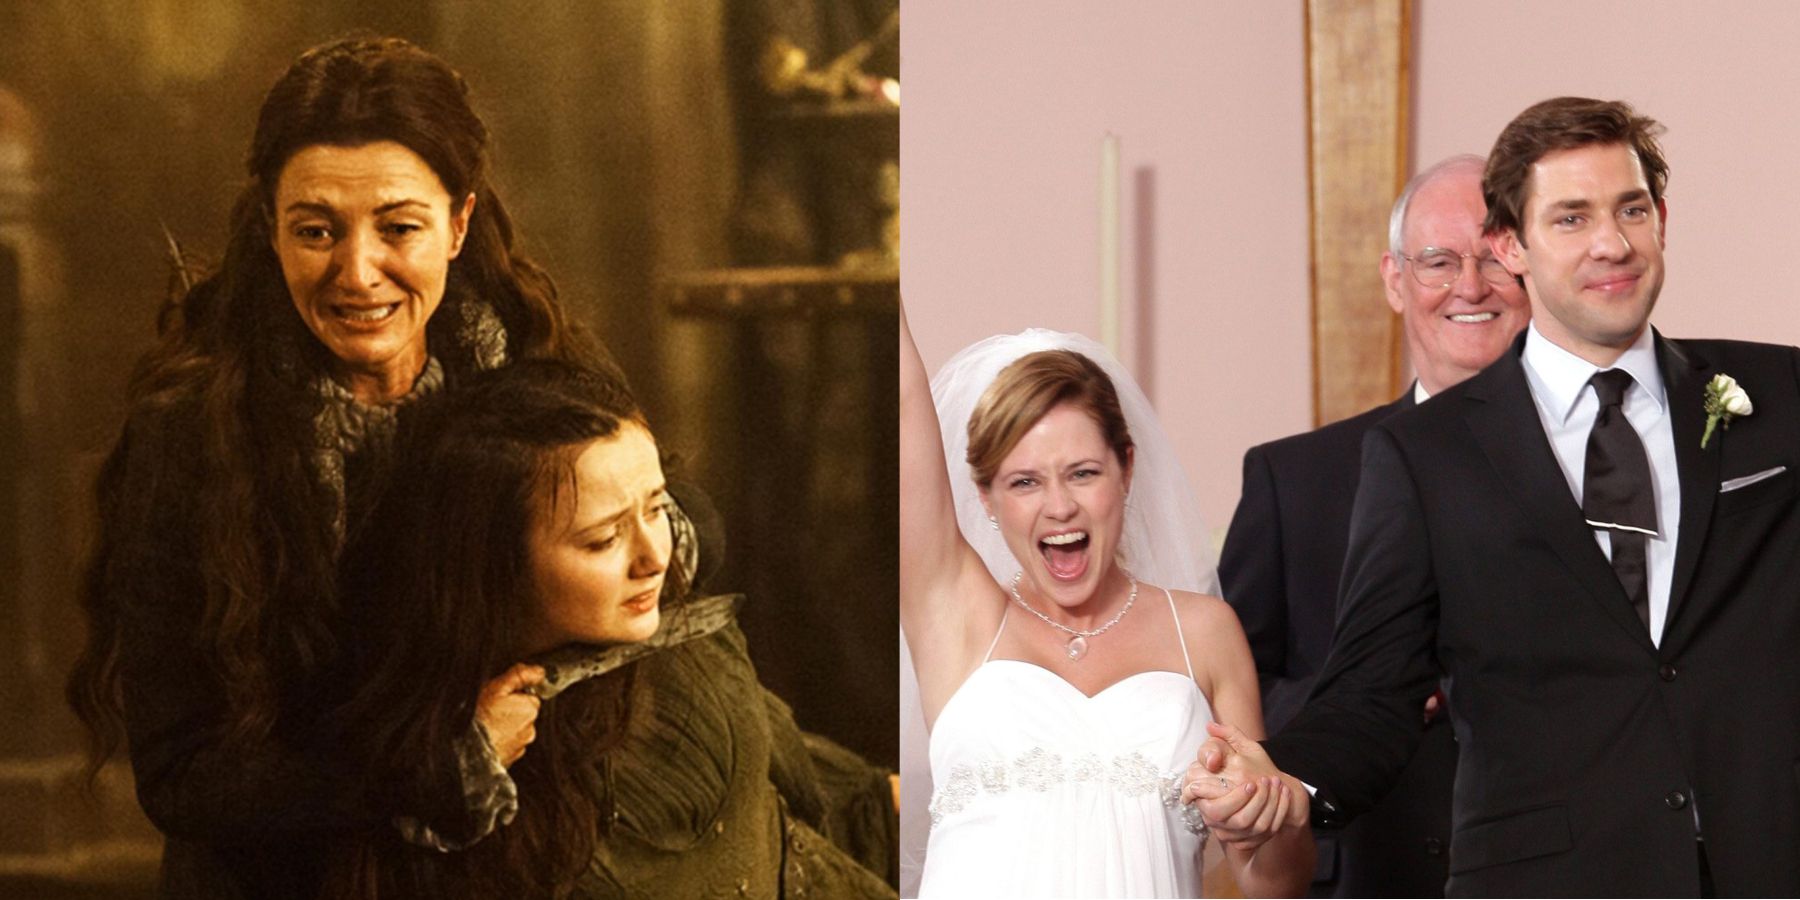 Most Iconic Weddings In TV Shows feature